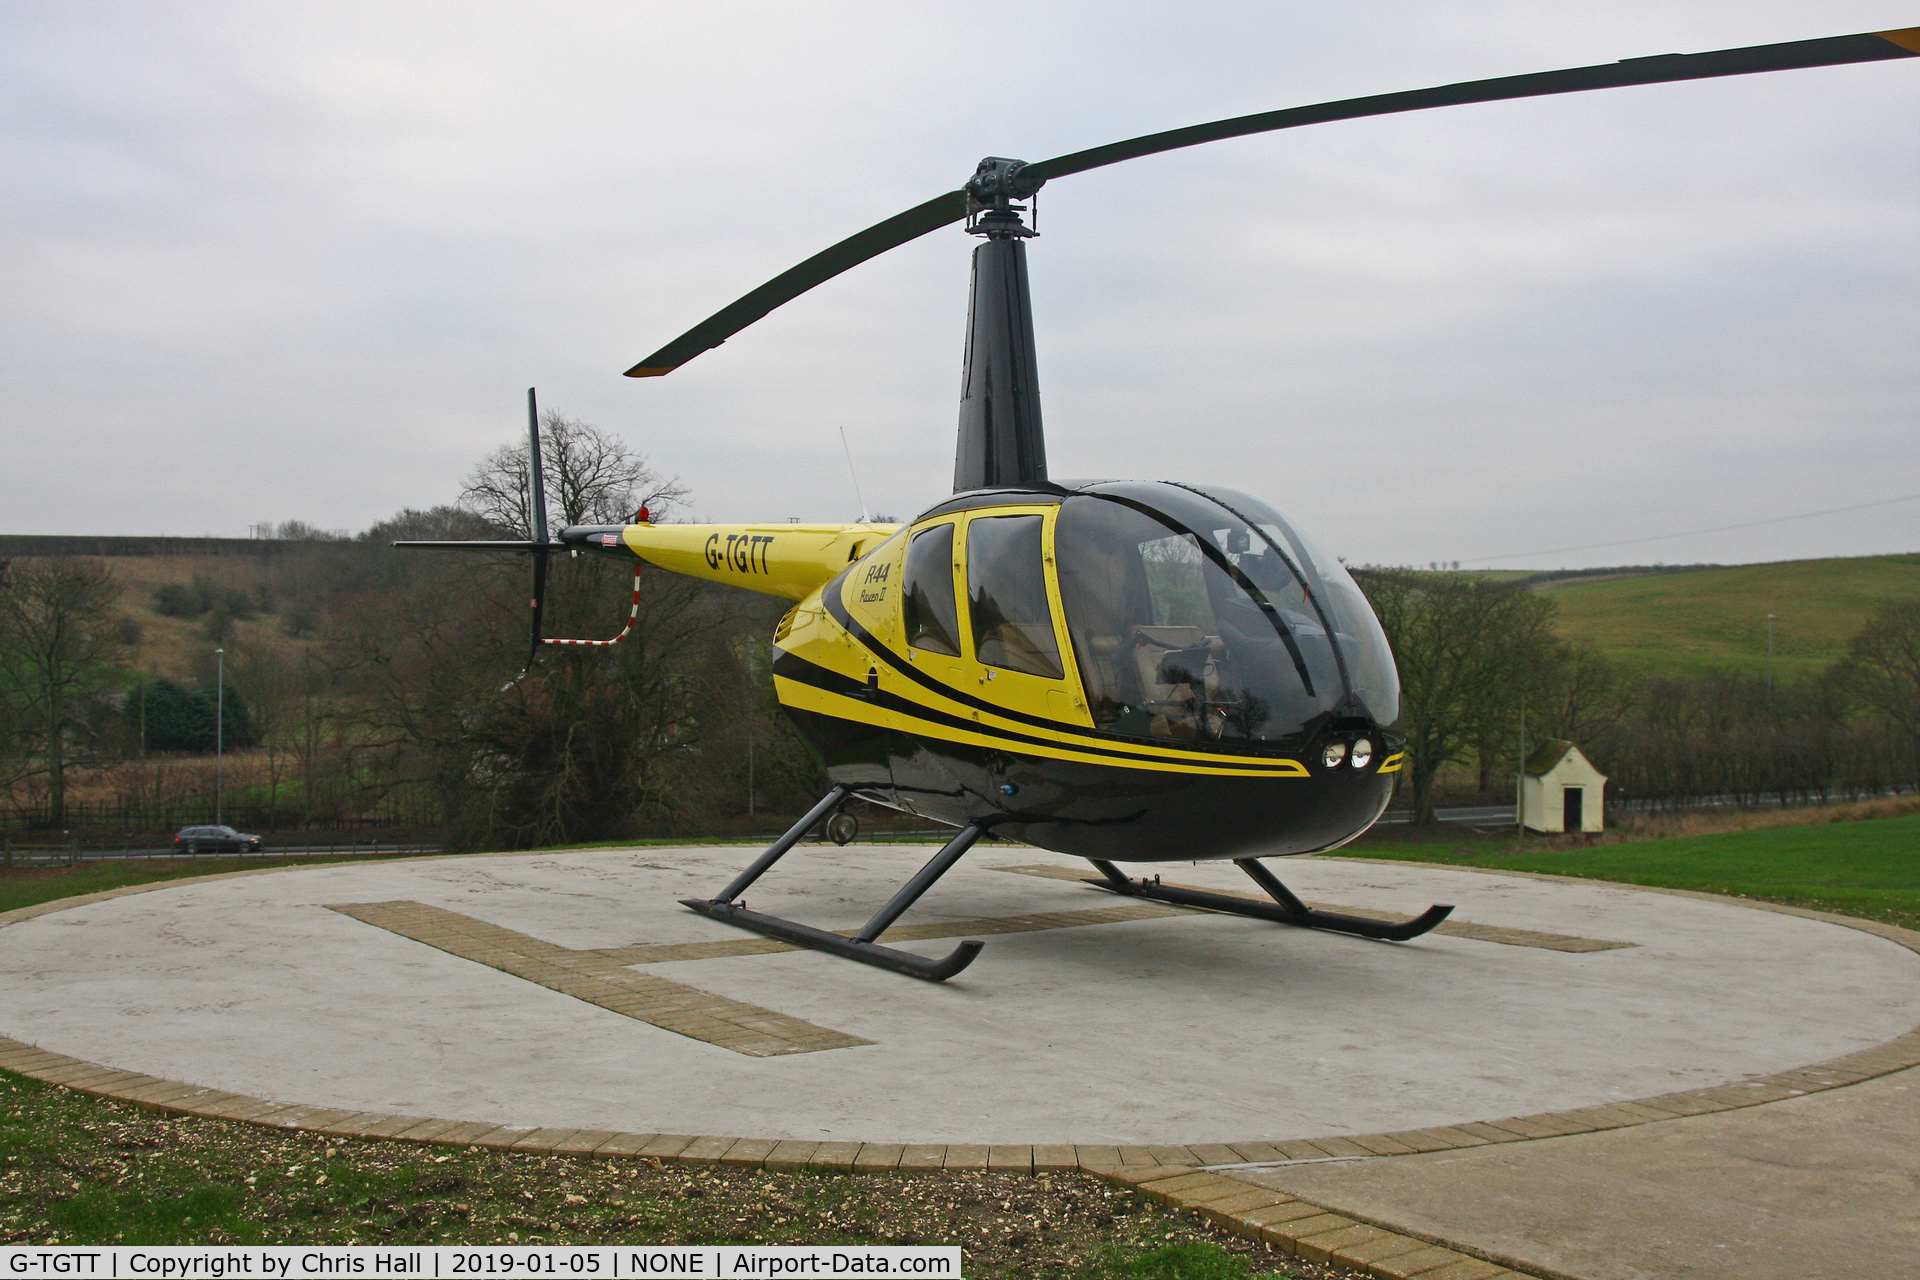 G-TGTT, 2002 Robinson R44 Raven II C/N 10023, at a private site after our flight from North Coates